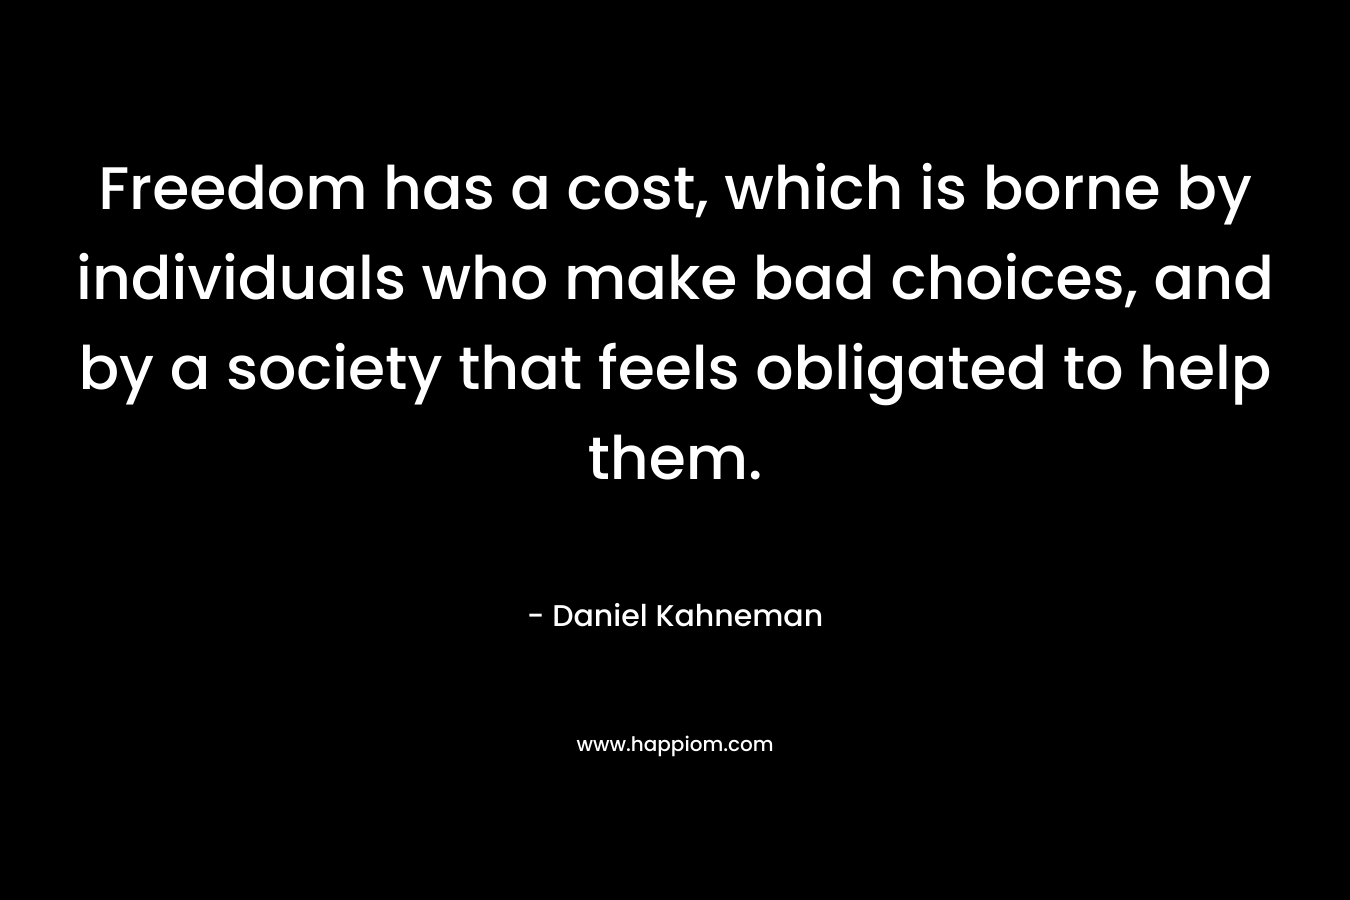 Freedom has a cost, which is borne by individuals who make bad choices, and by a society that feels obligated to help them. – Daniel Kahneman